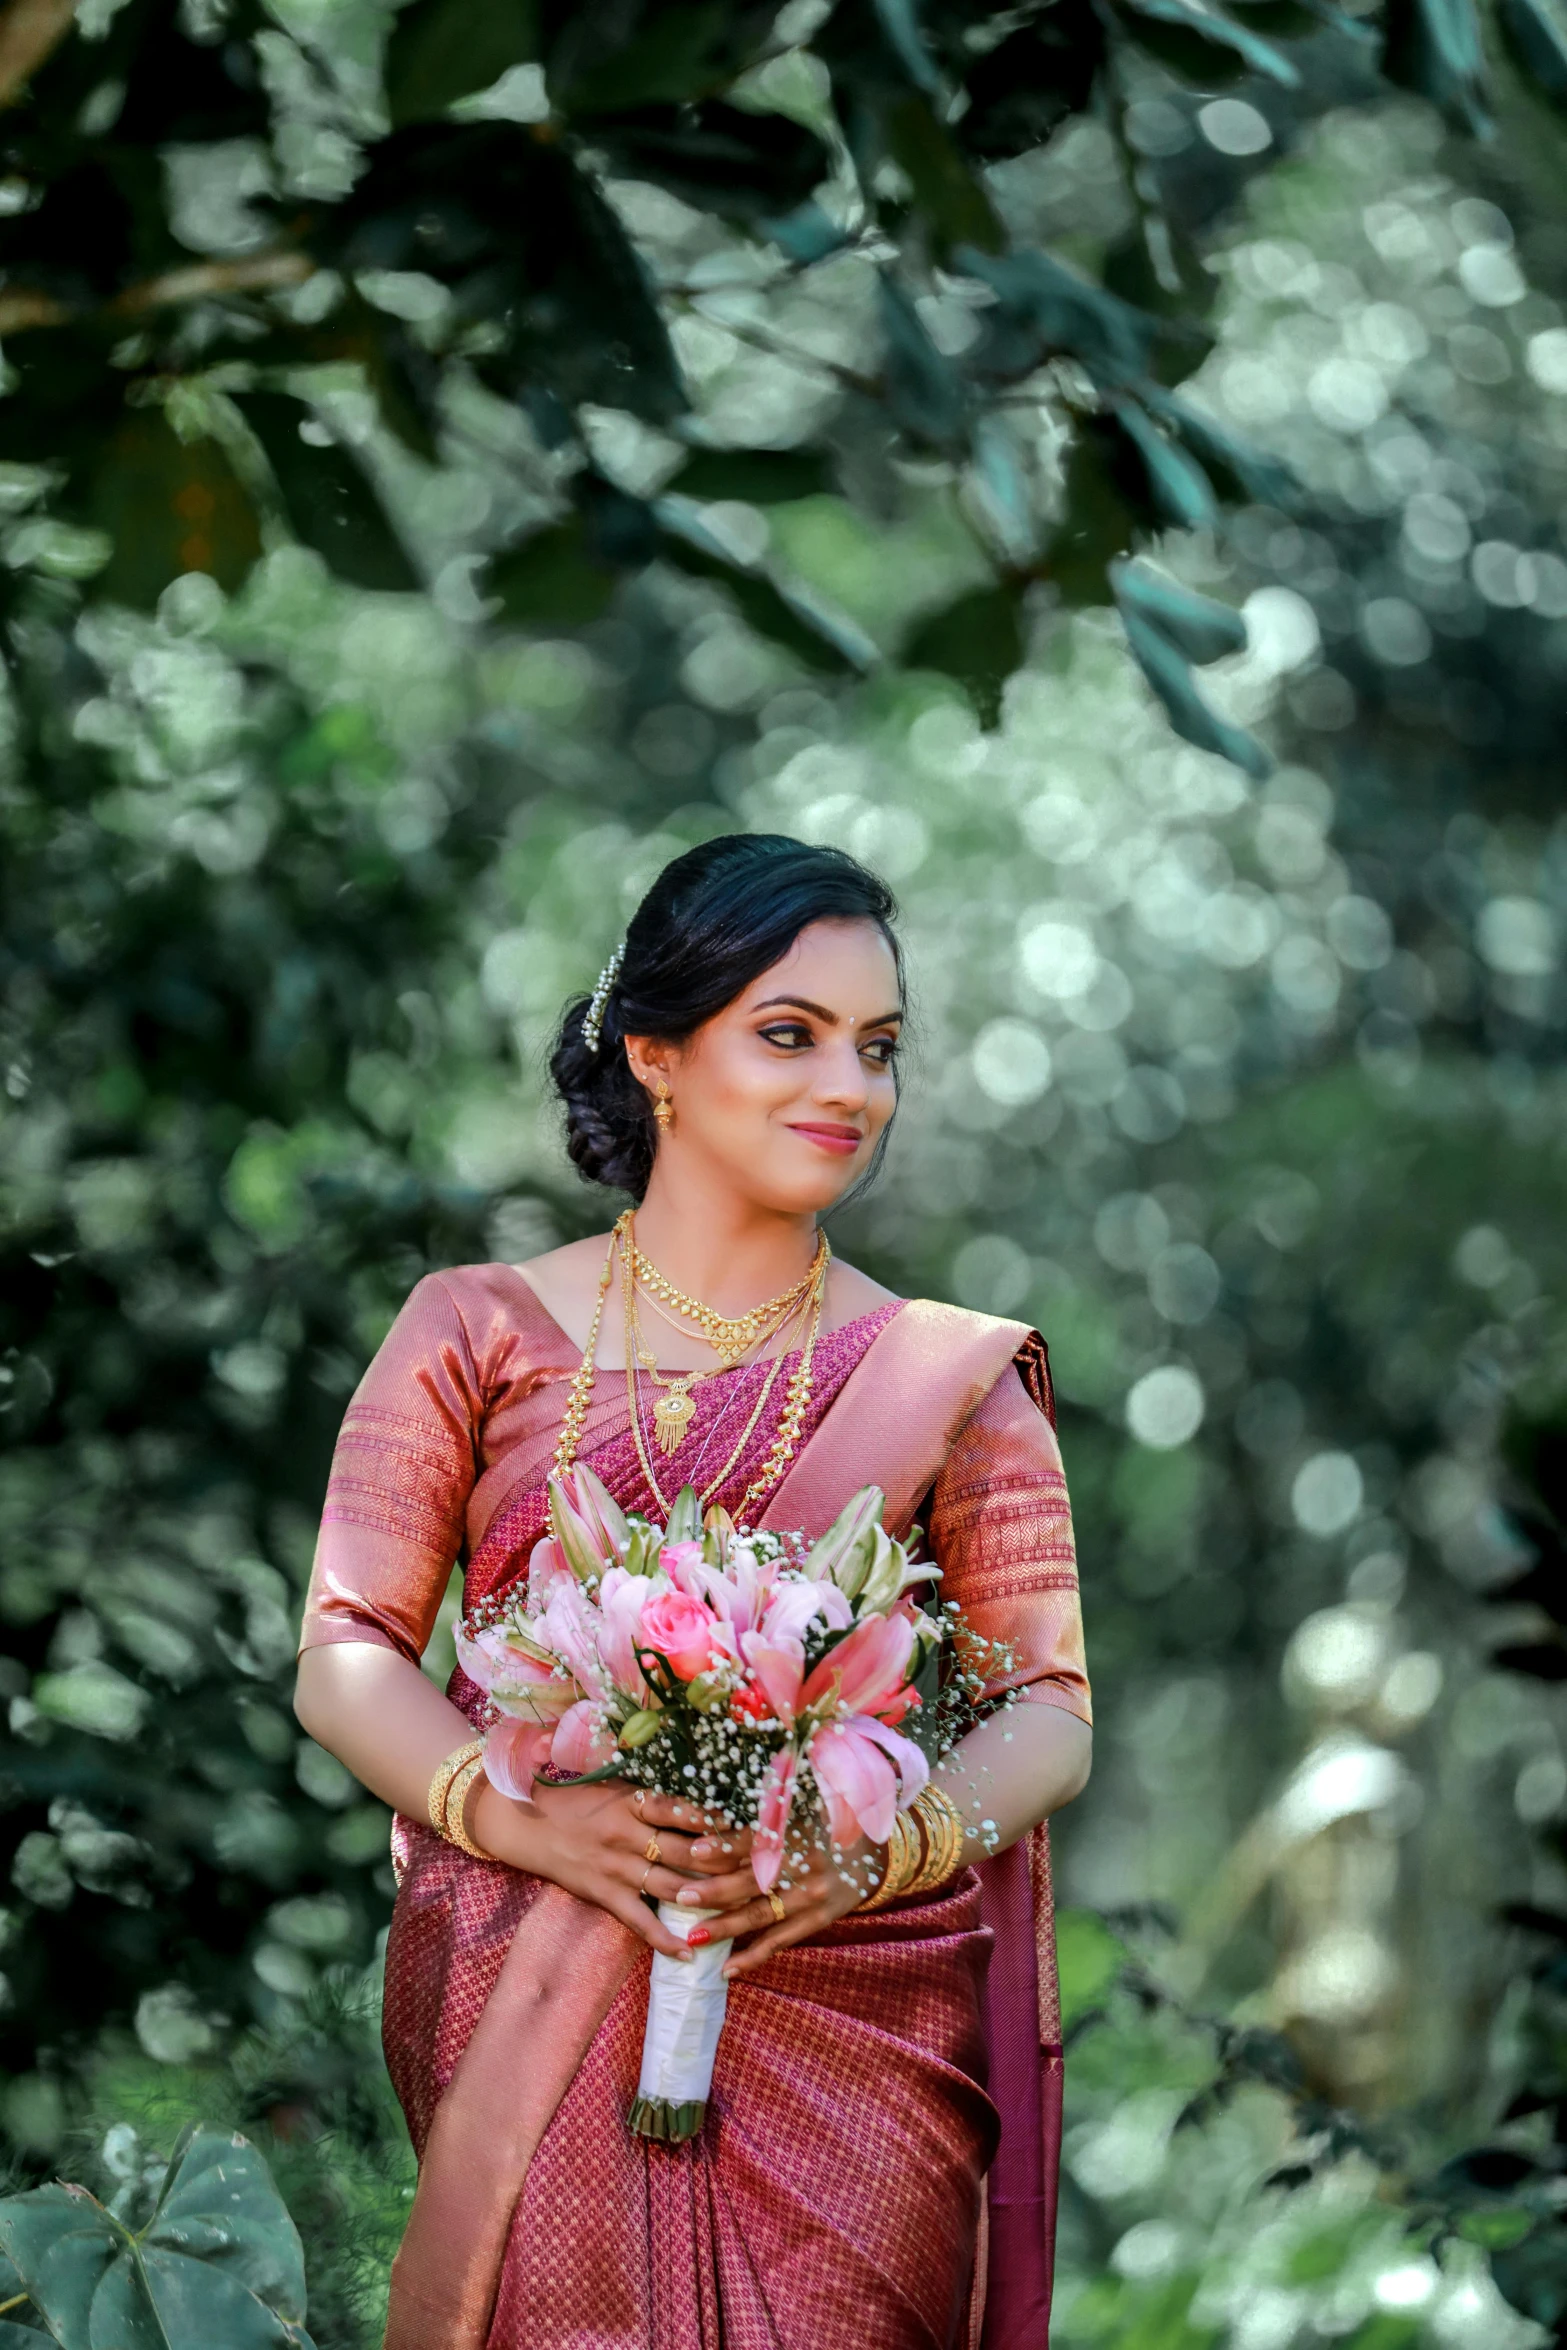 a woman stands near some greenery holding her bouquet